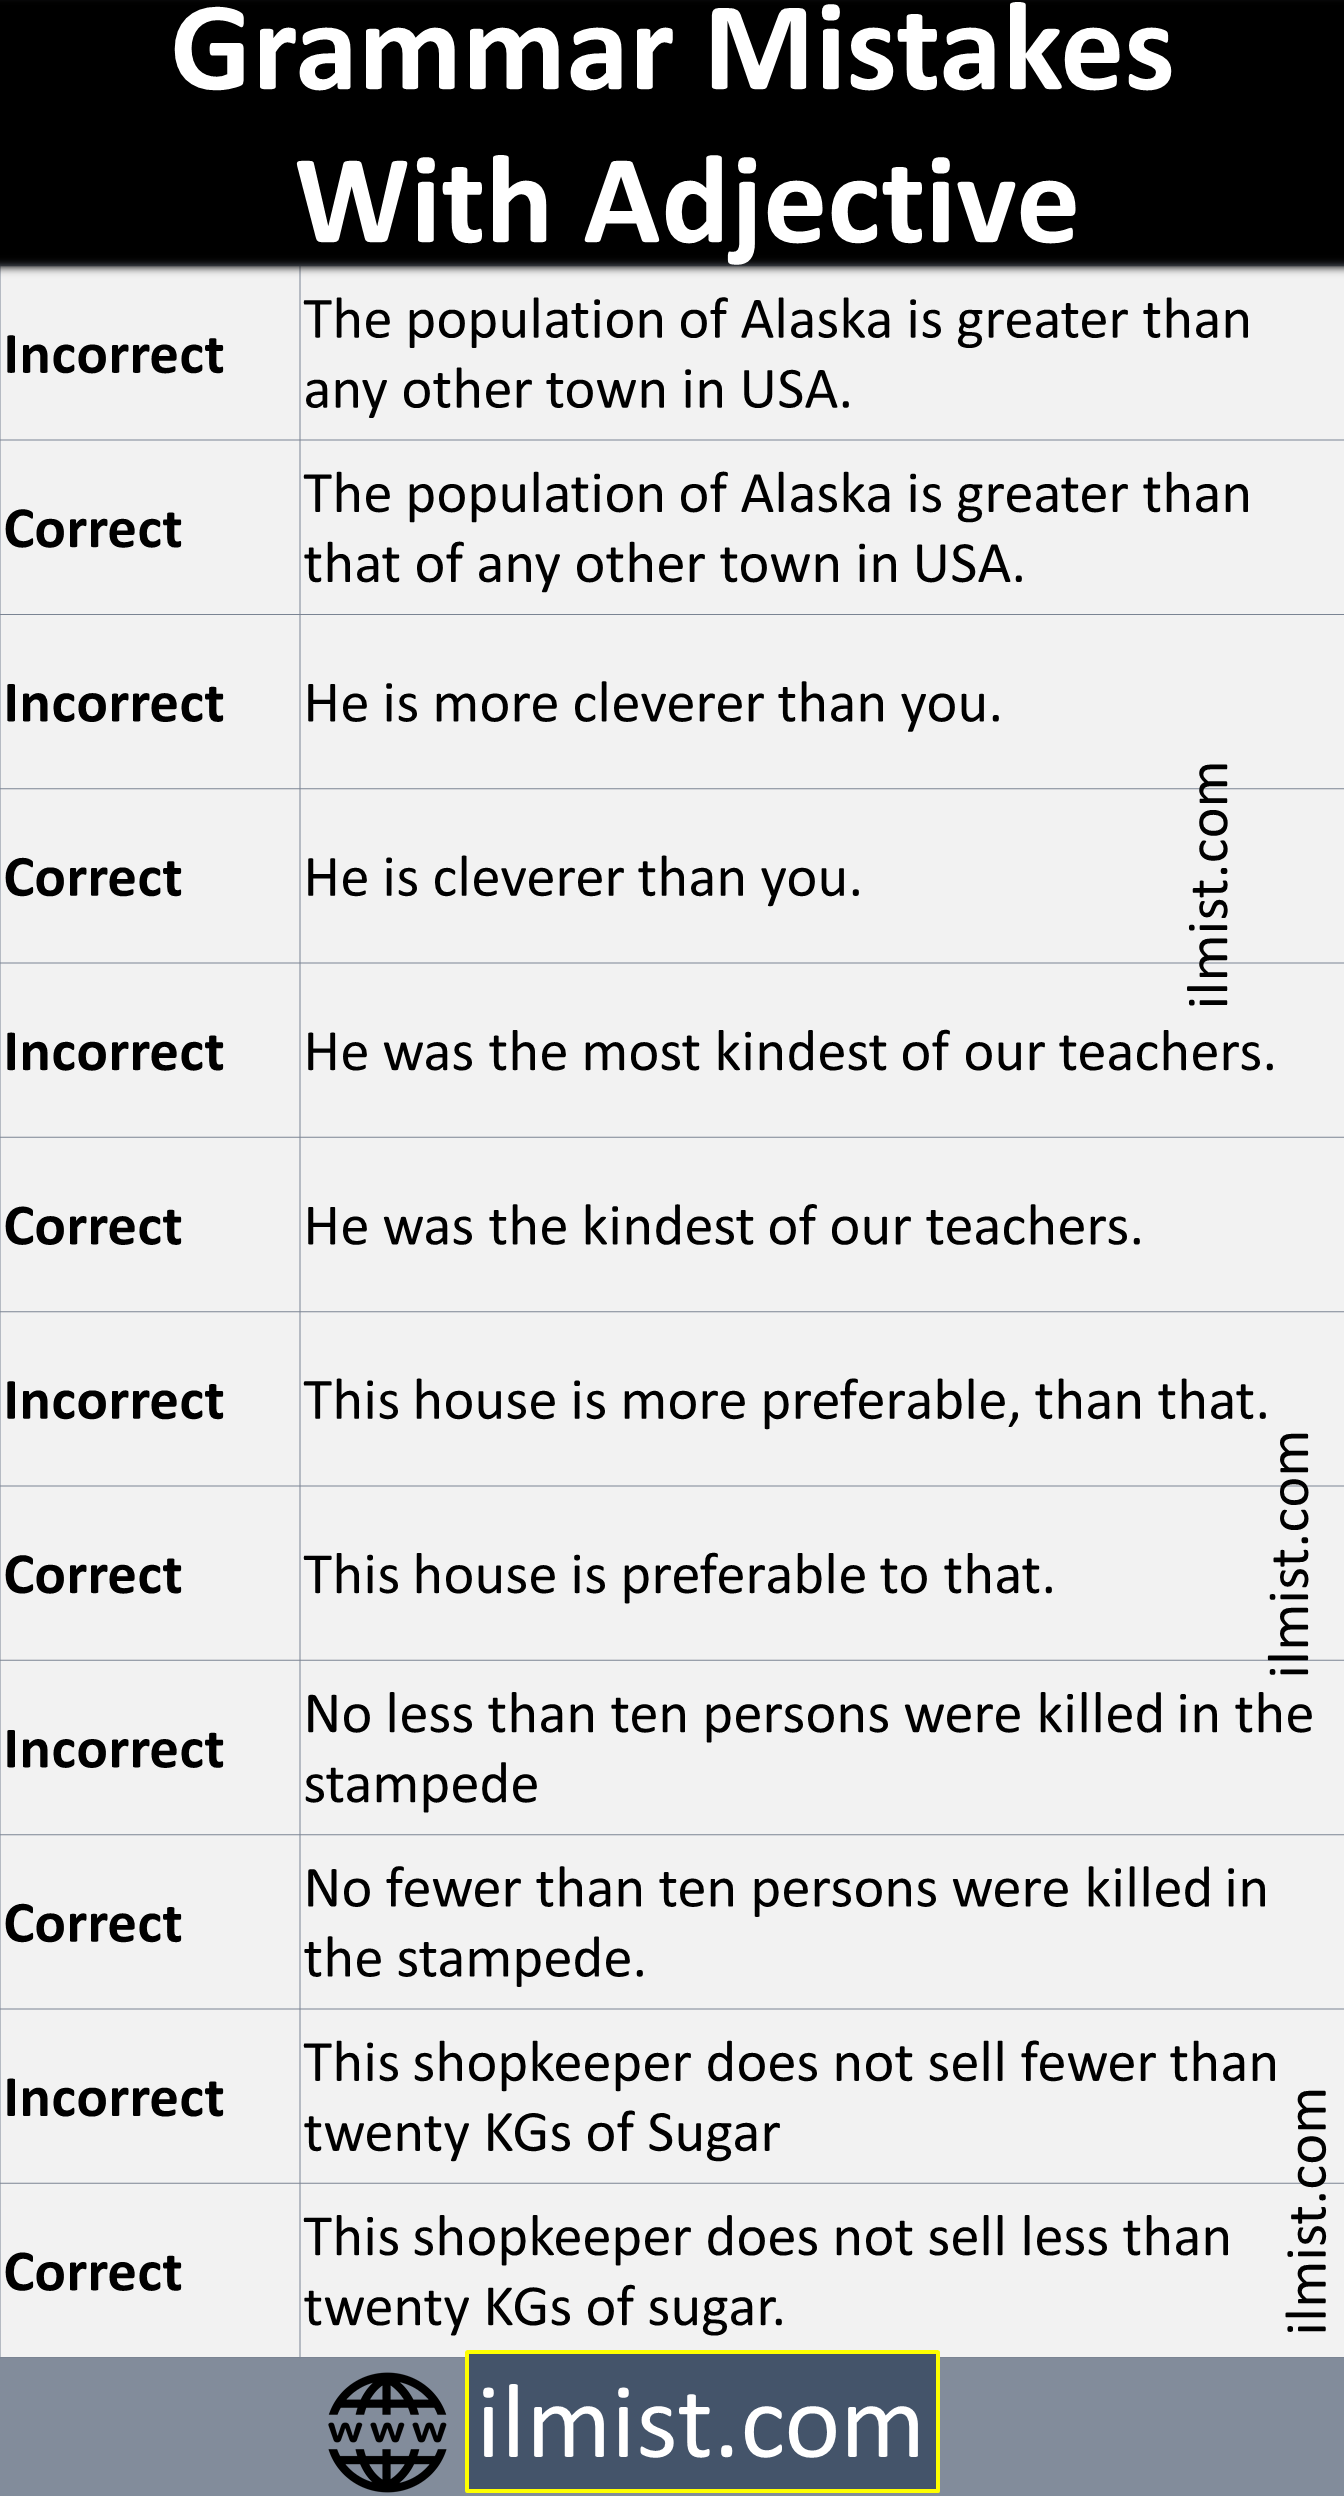 Adjective Definition | Common Mistakes With Adjectives In Grammar